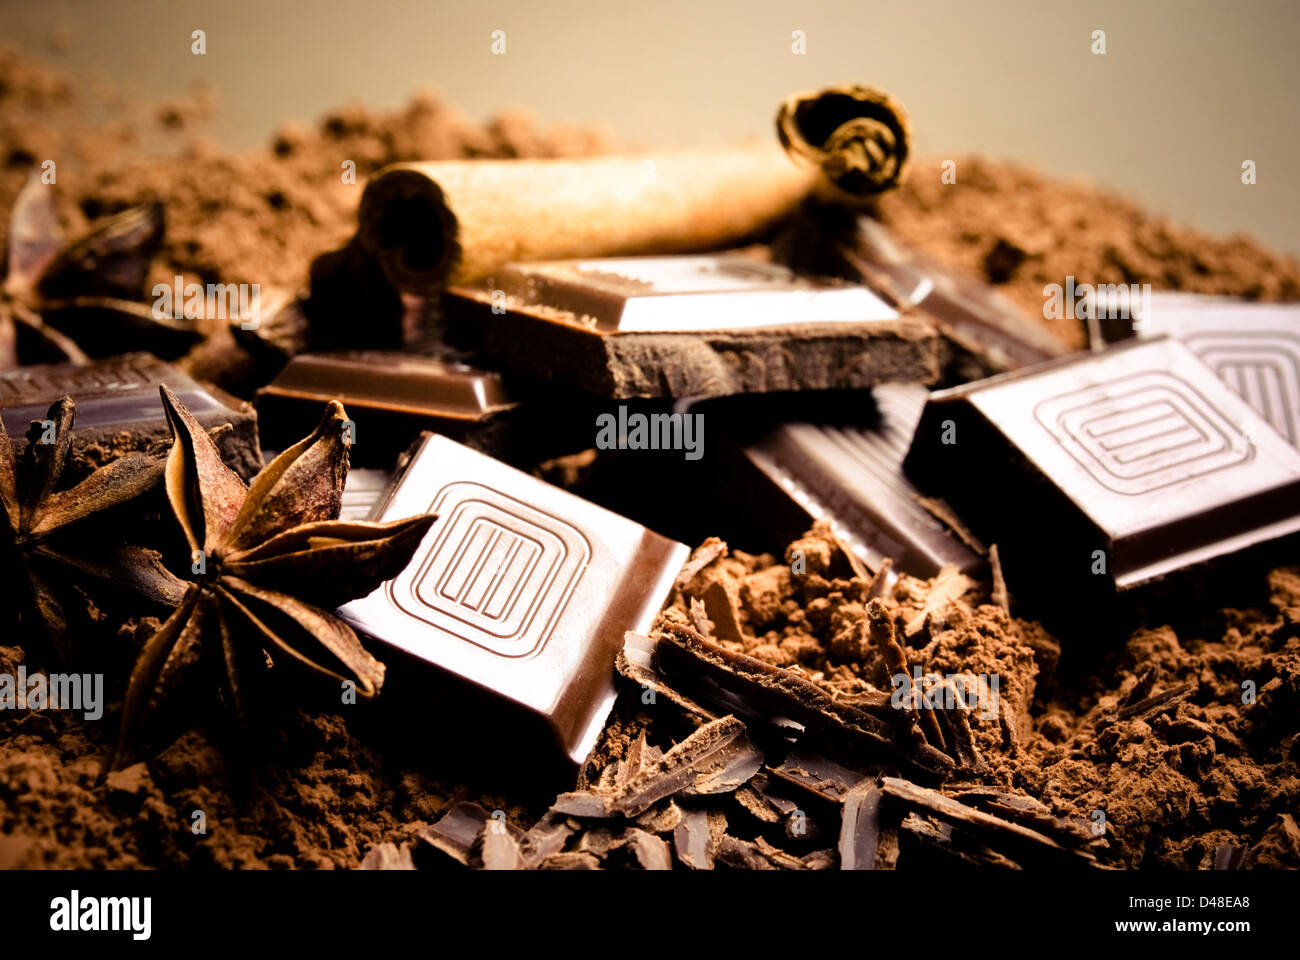 chocolate and cocoa powder with anise and cinnamon spices Stock Photo